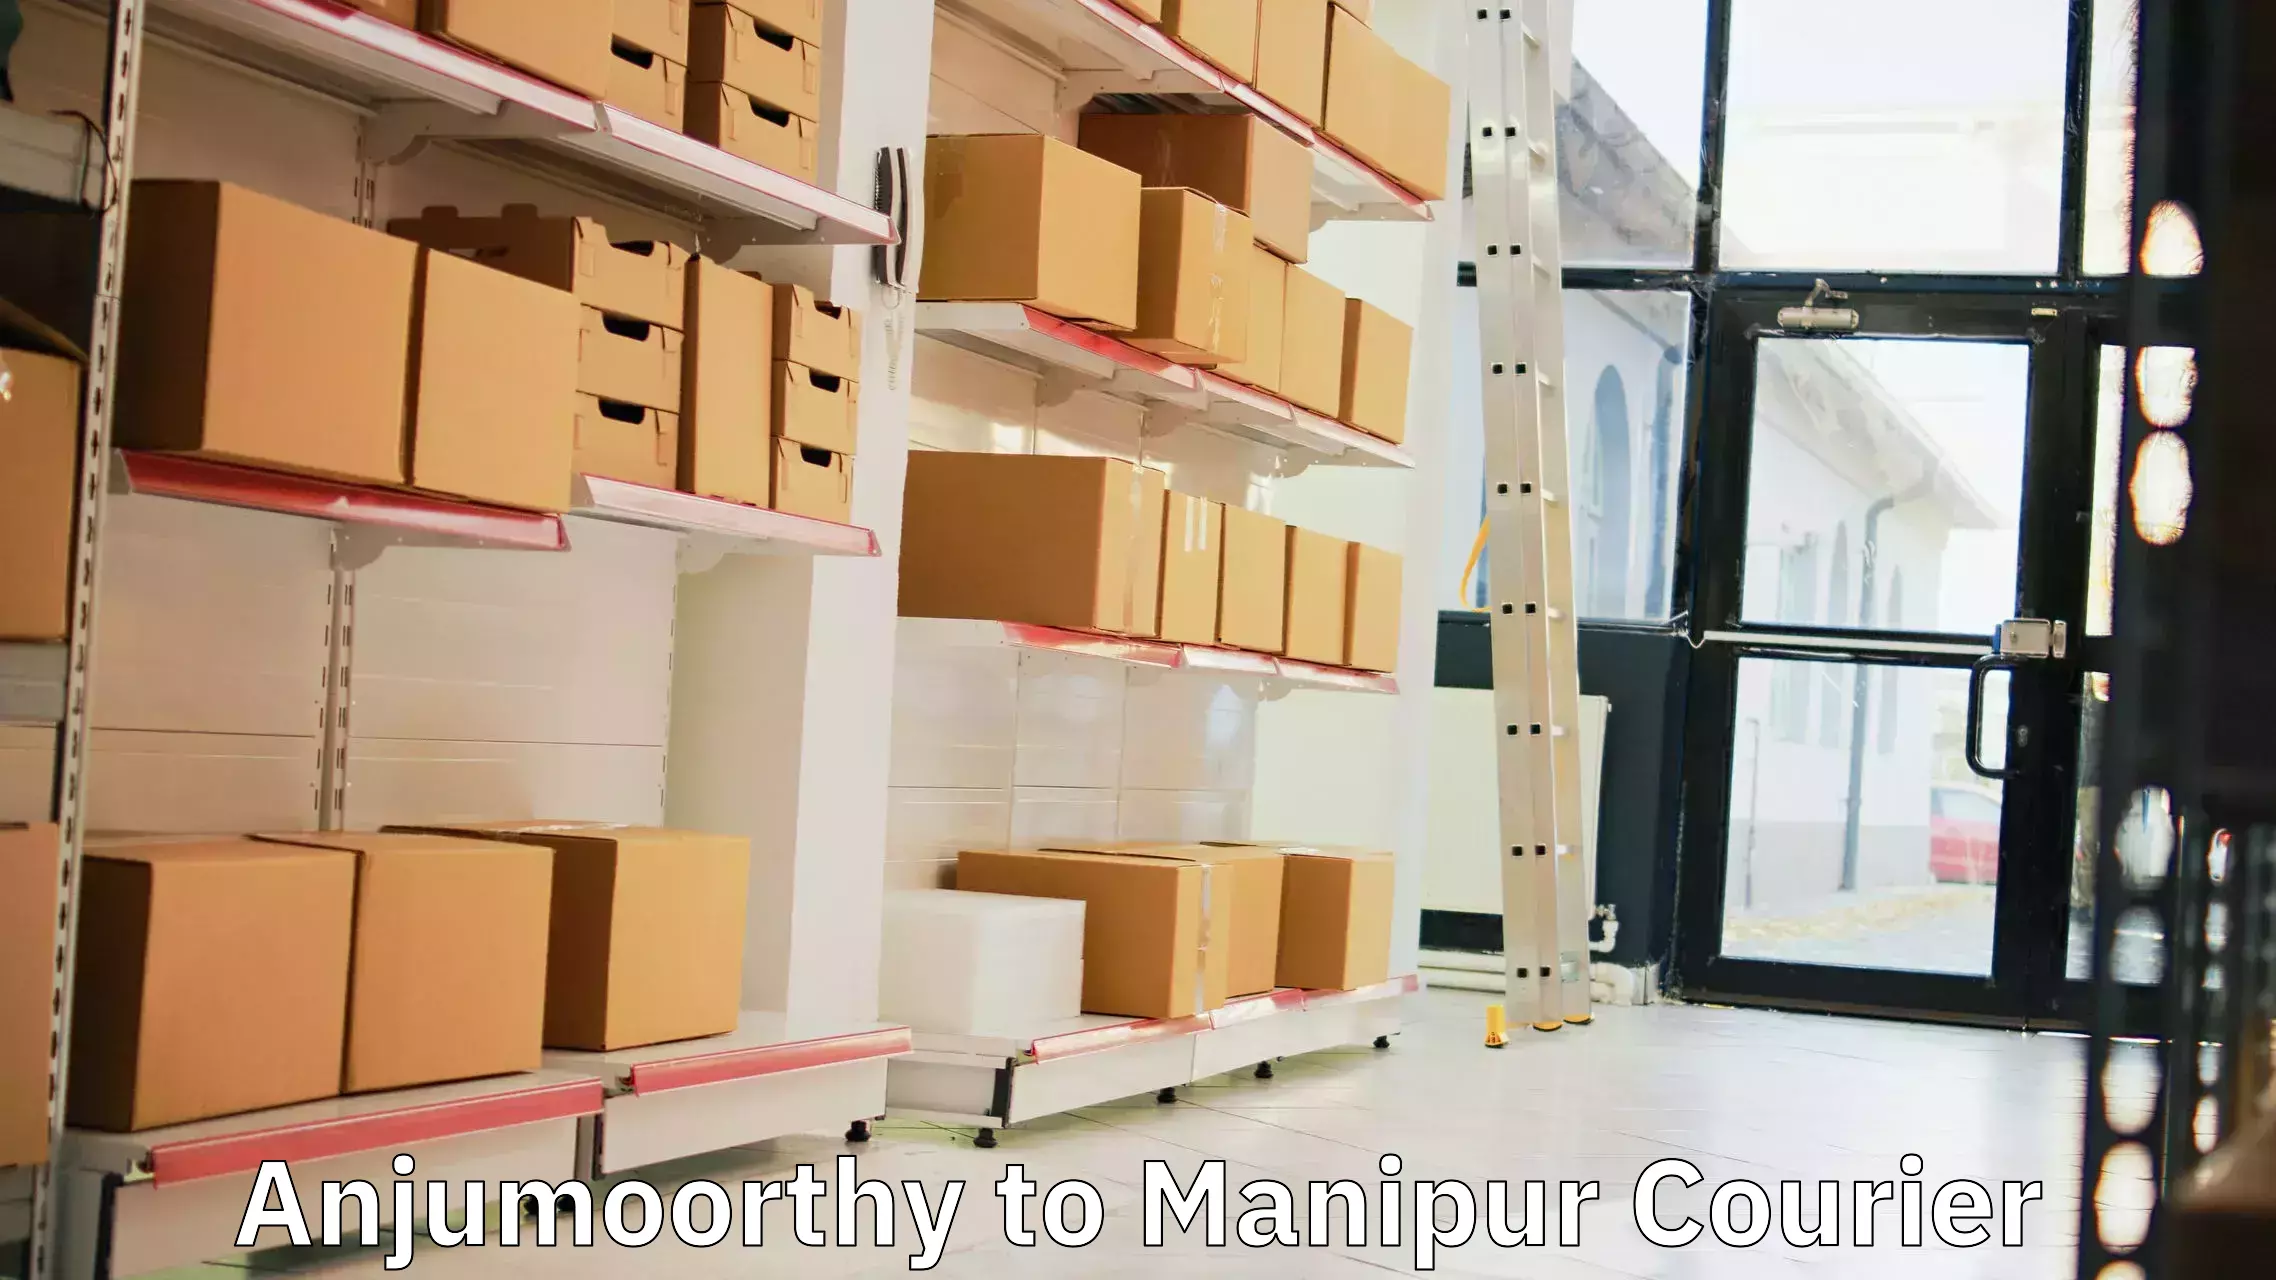 Business courier solutions Anjumoorthy to Kanti